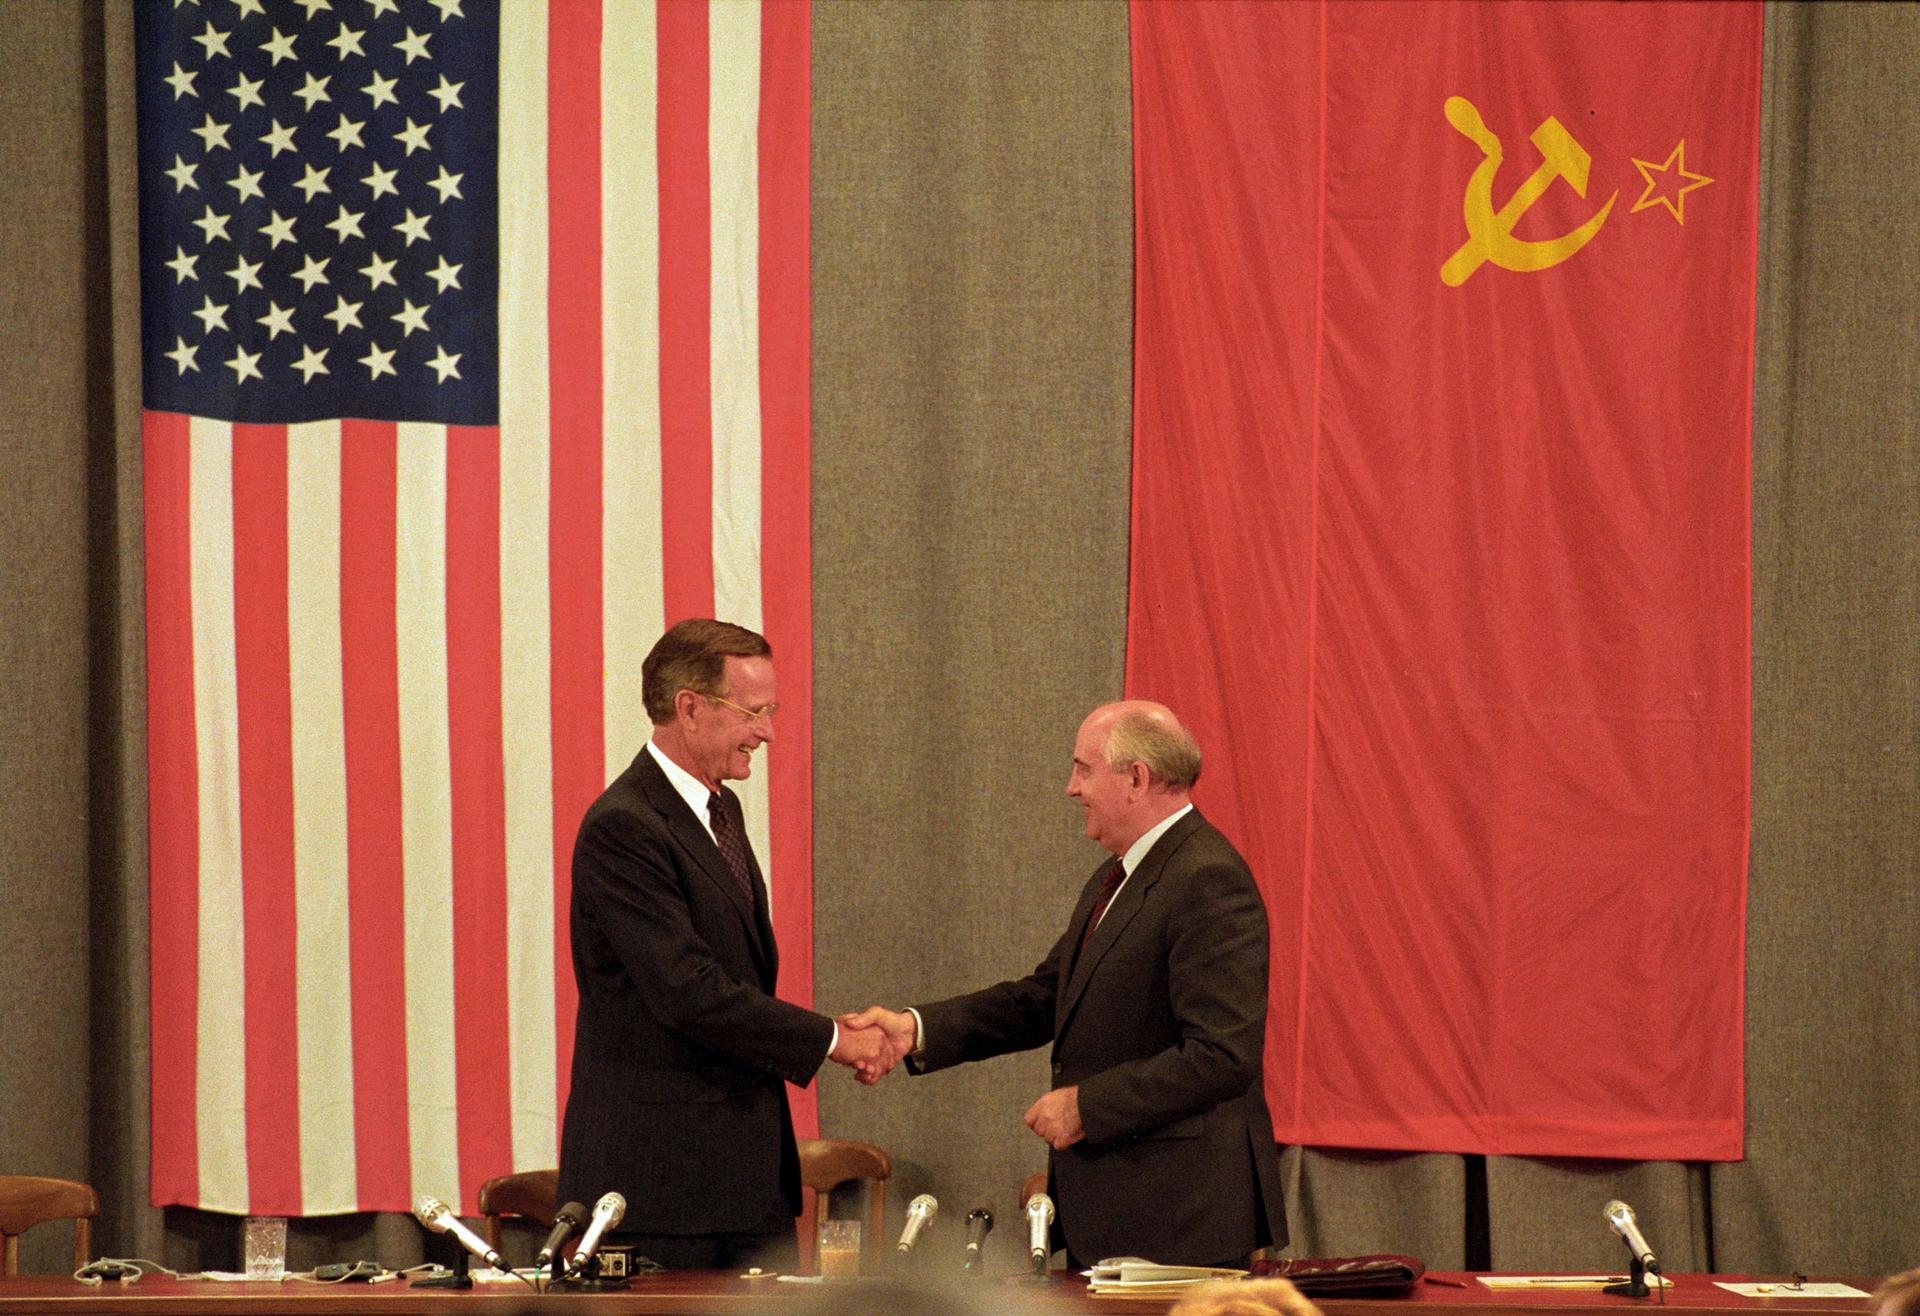 President HW Bush stands in front of an American flag and Soviet President Mikhail Gorbachev stands in front a Soviet flag as the two shake hands.